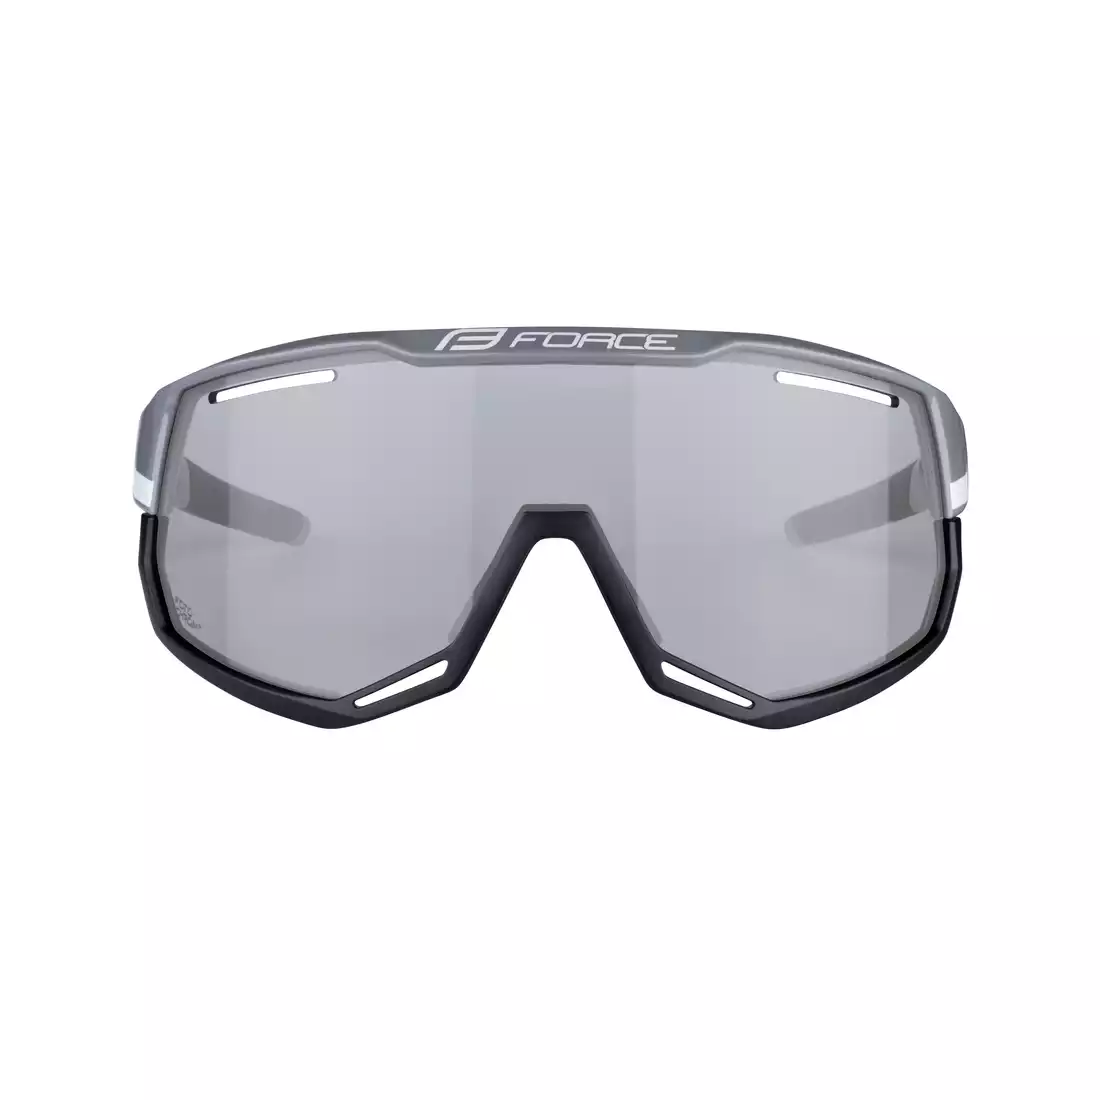 FORCE ATTIC Photochromic sports glasses, gray and black